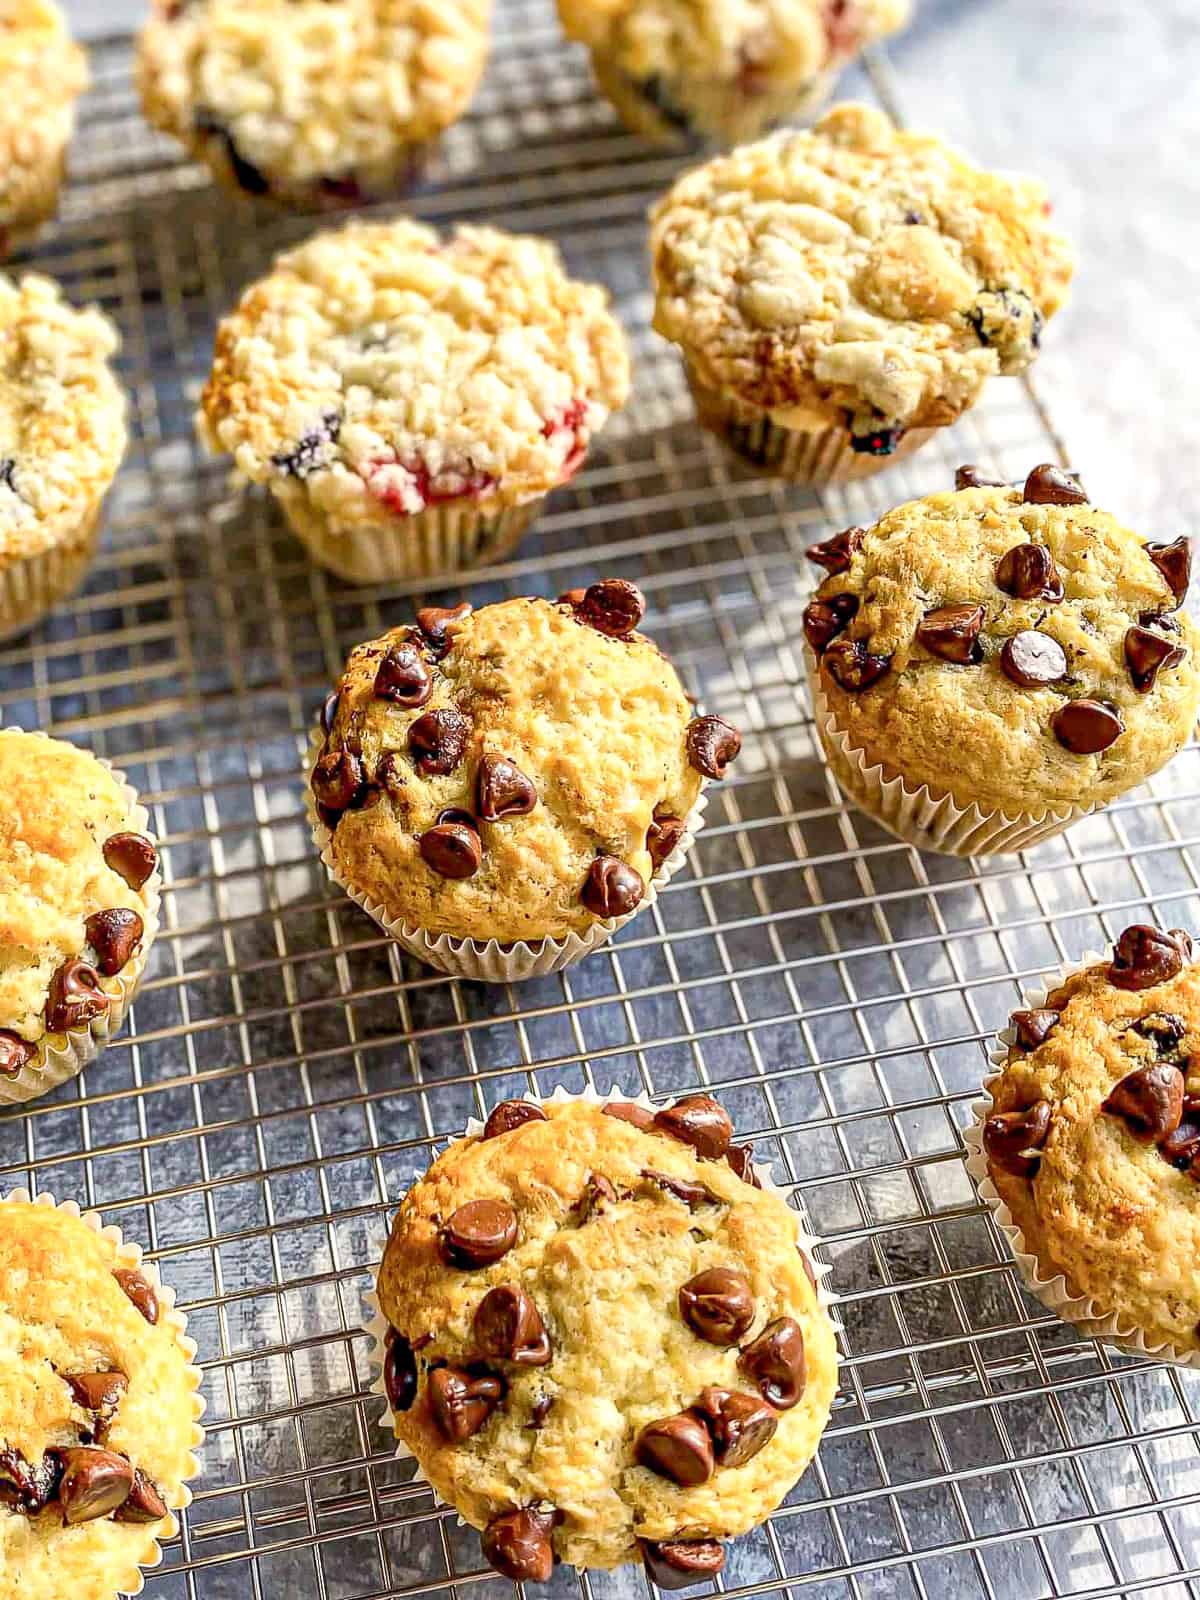 Fruit streusel muffins and chocolate chip muffins on a wire rack.